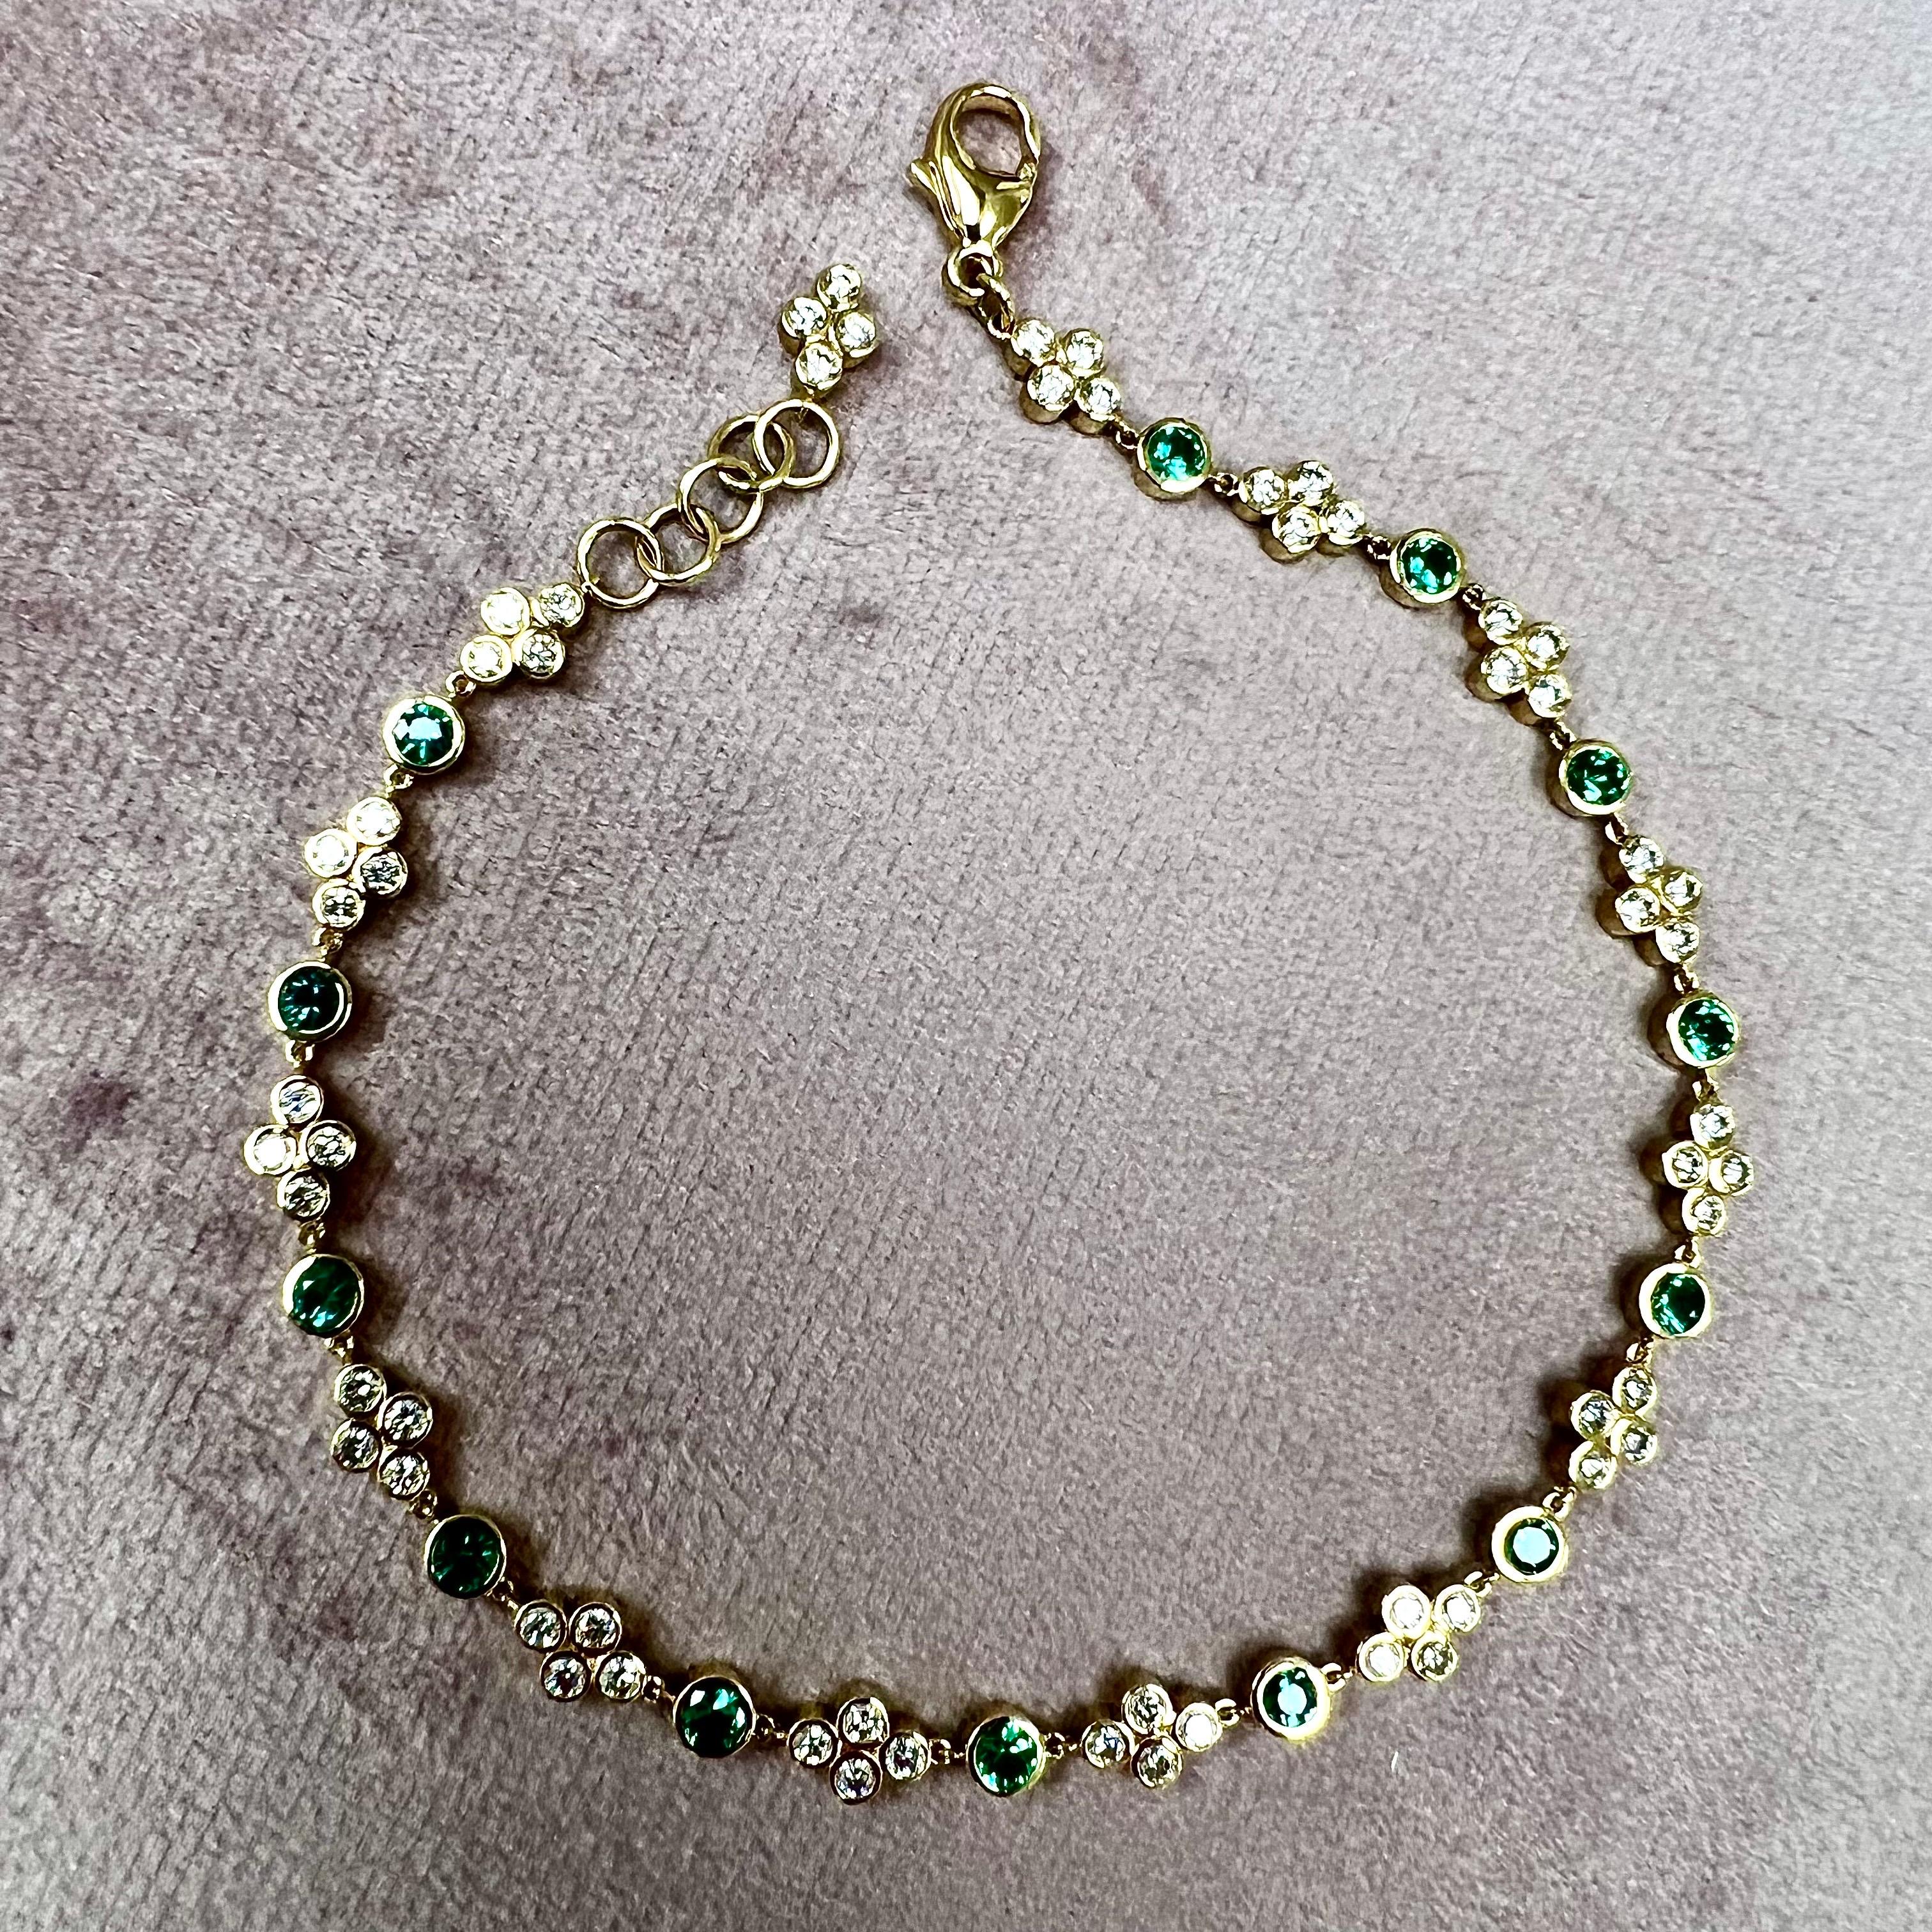 Created in 18 karat yellow gold
Emeralds 1.20 carats approx.
Diamonds 1.50 carats approx.
8 inch length with lobster clasp
Bracelet can be clasped at any length

Handcrafted from 18 karat yellow gold, this bracelet features emeralds estimated at